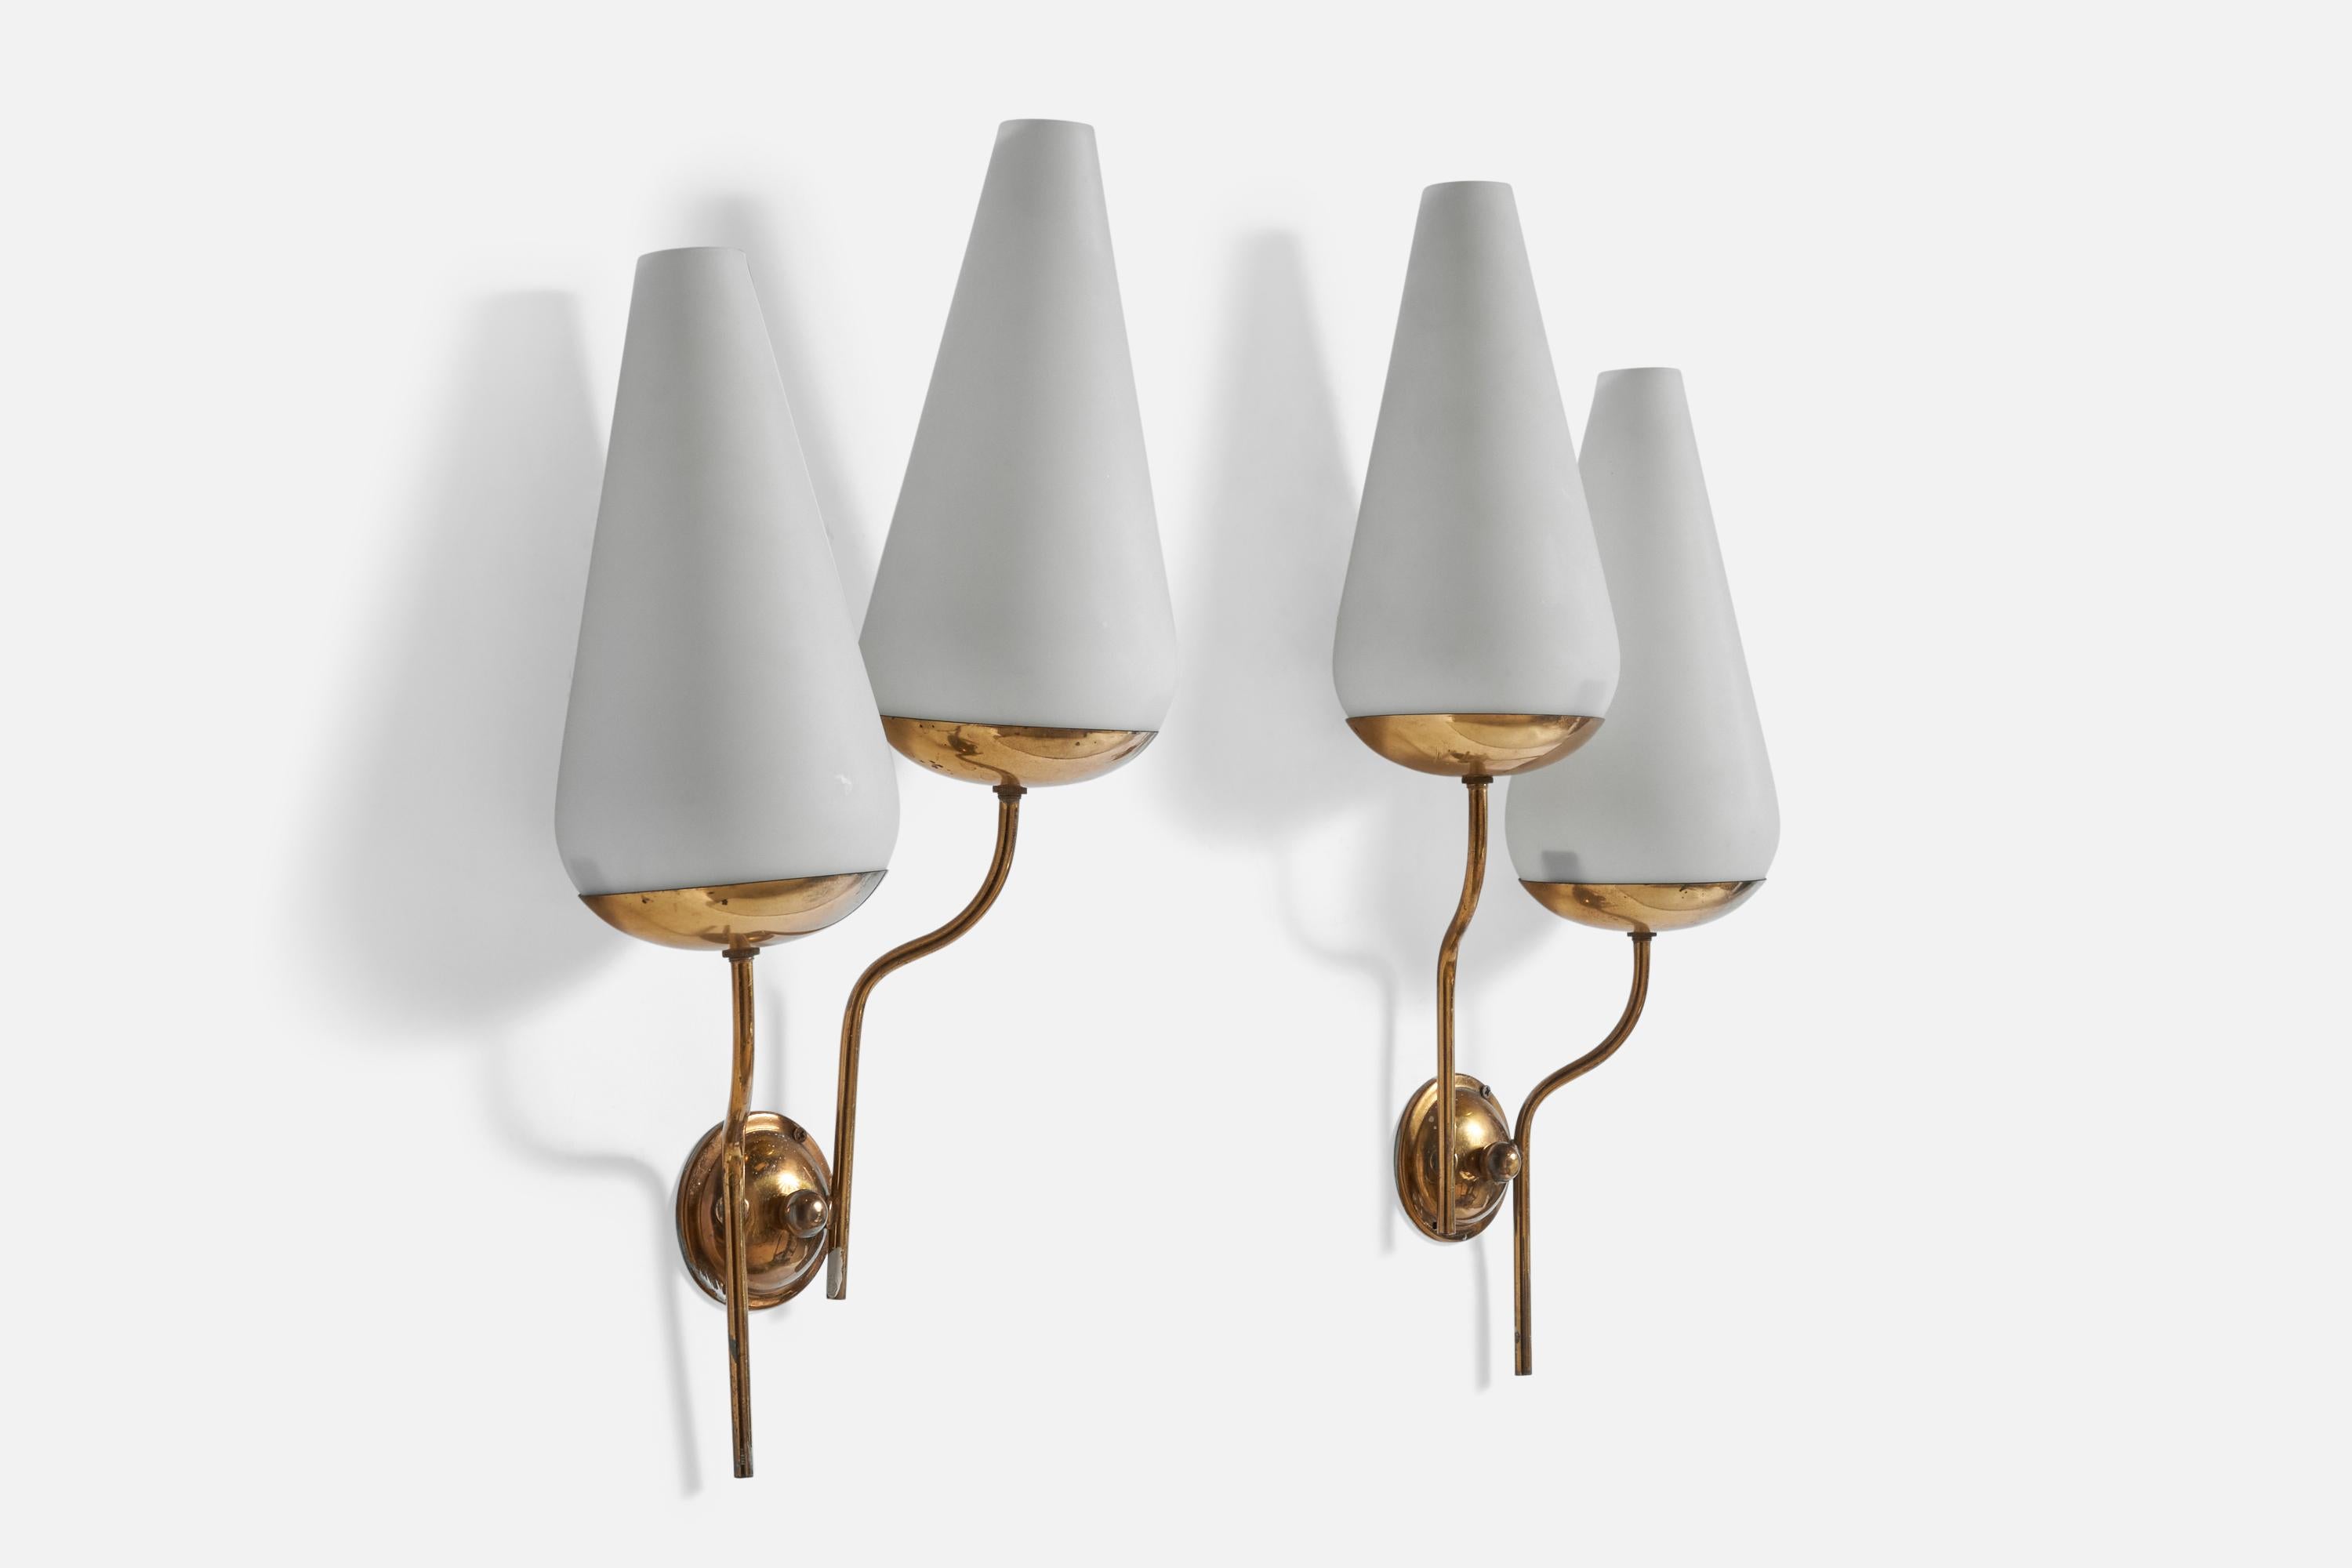 A pair of brass and opaline glass wall lights designed and produced in Italy, 1950s.

Overall Dimensions (inches): 18.5” H x 9” W x 5.5” D
Back Plate Dimensions (inches): 2.9 diameter x 1.25” depth
Bulb Specifications: E-14 Bulbs
Number of Sockets: